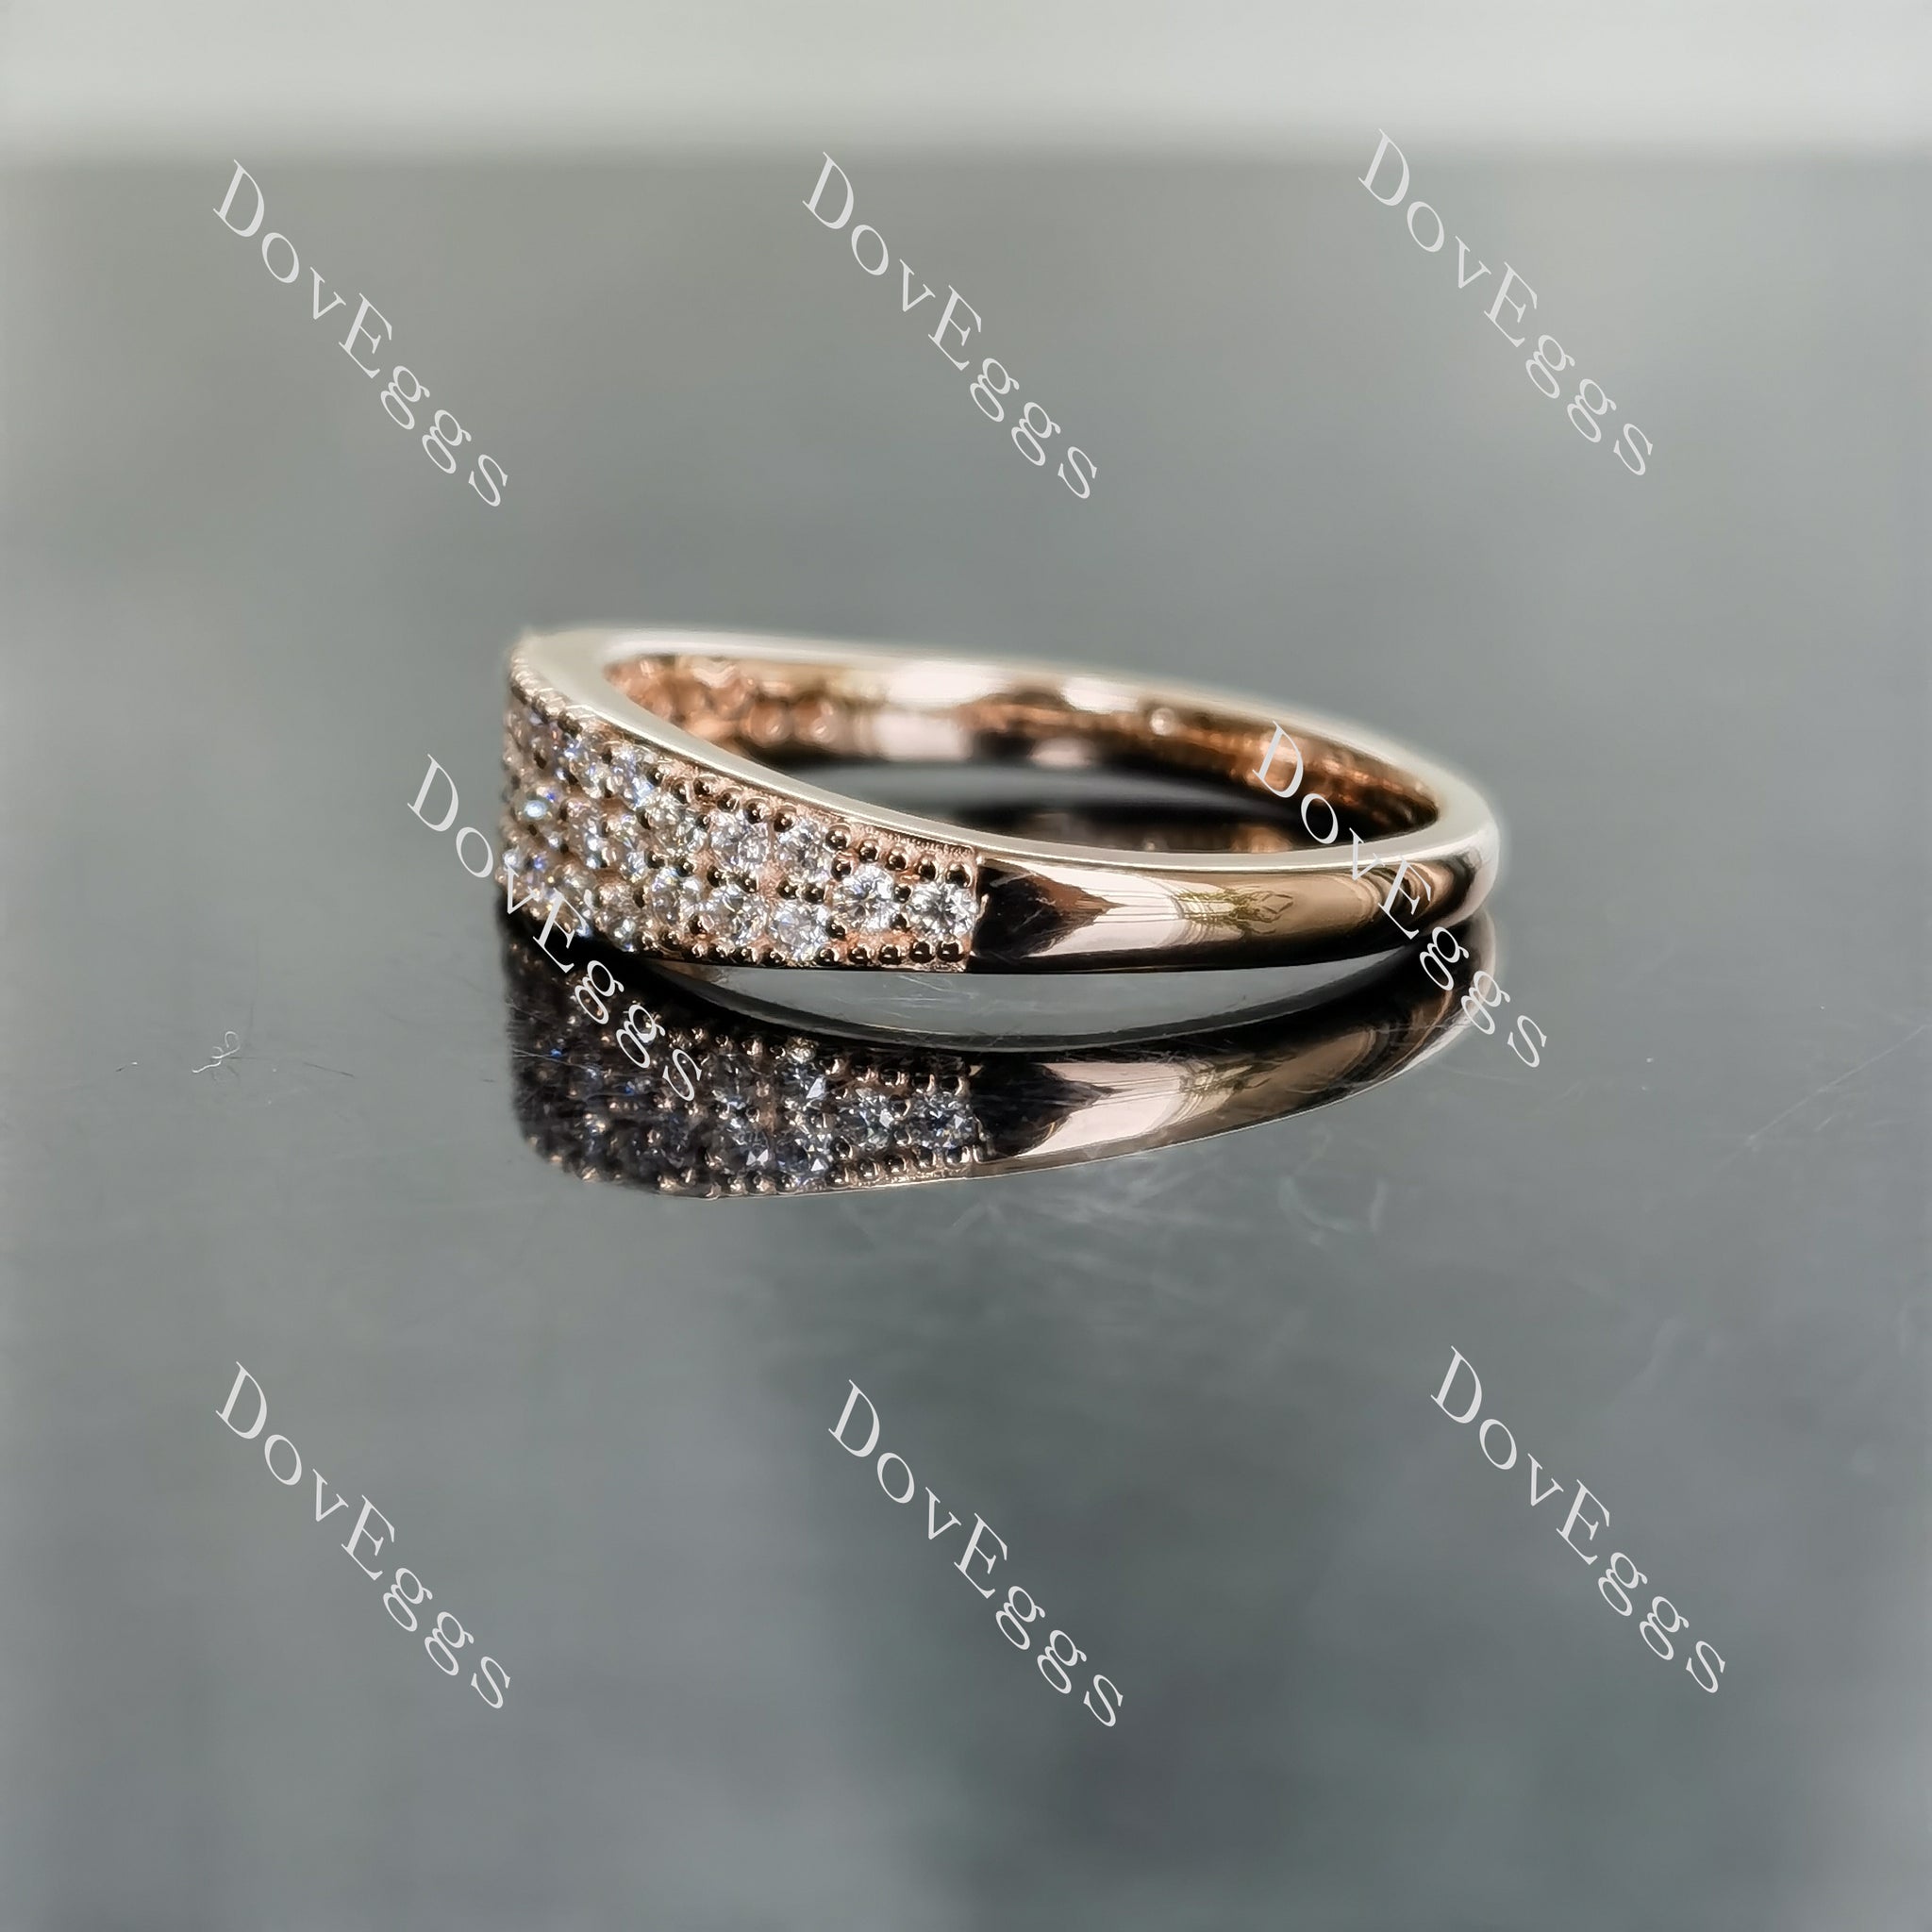 Doveggs round pave moissanite wedding band-2.0mm band width